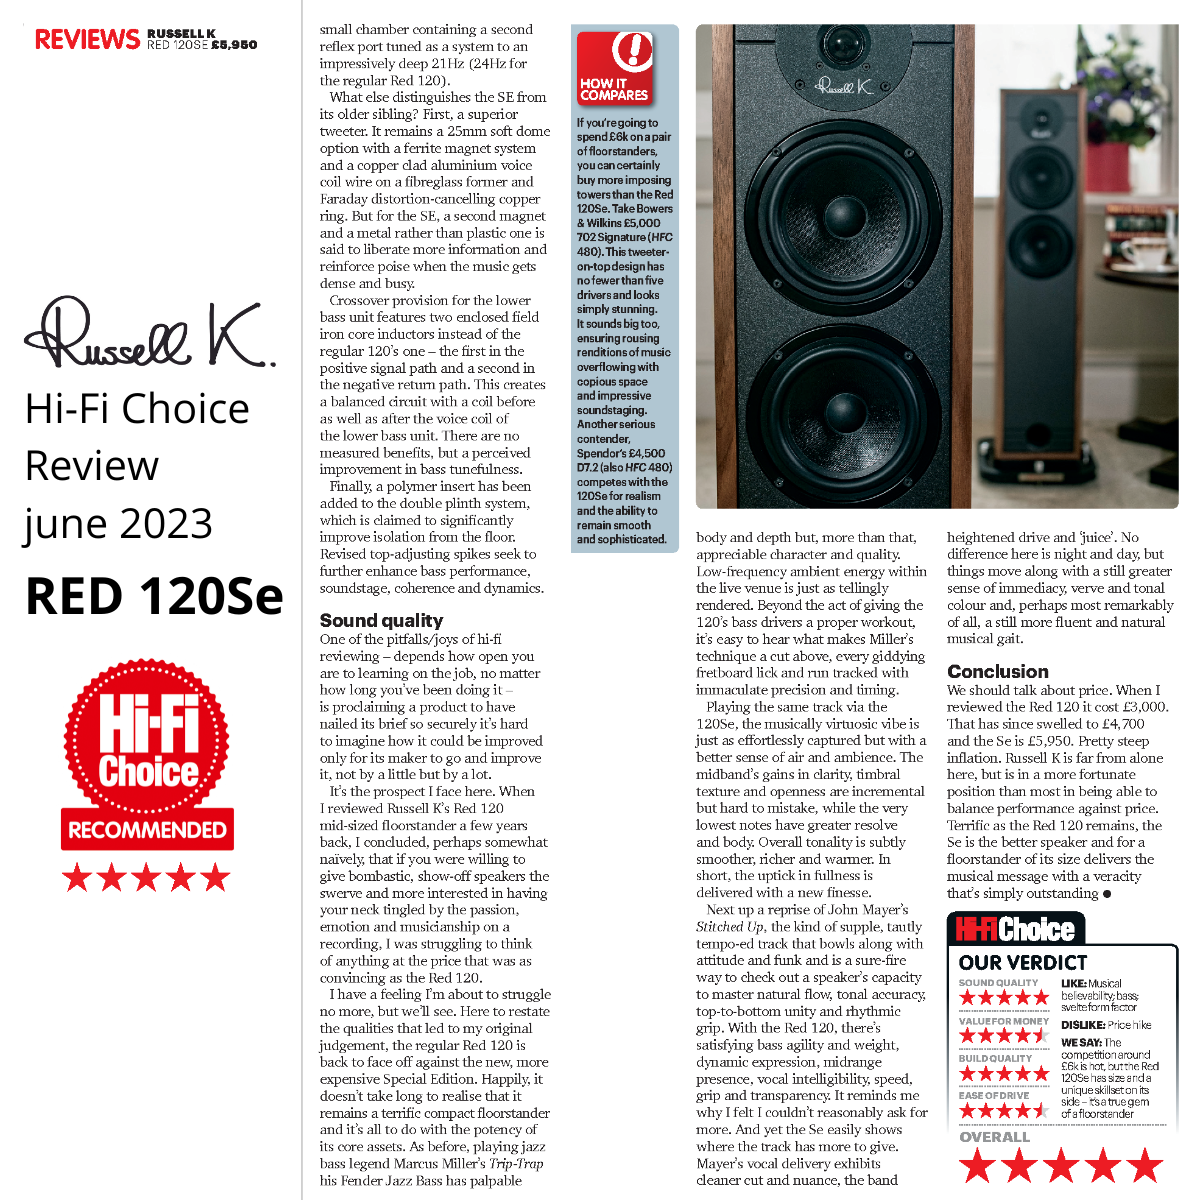 Page 2of2 review Hi-Fi Choice june 2023 - all stars recommened - Russell K Red 120Se